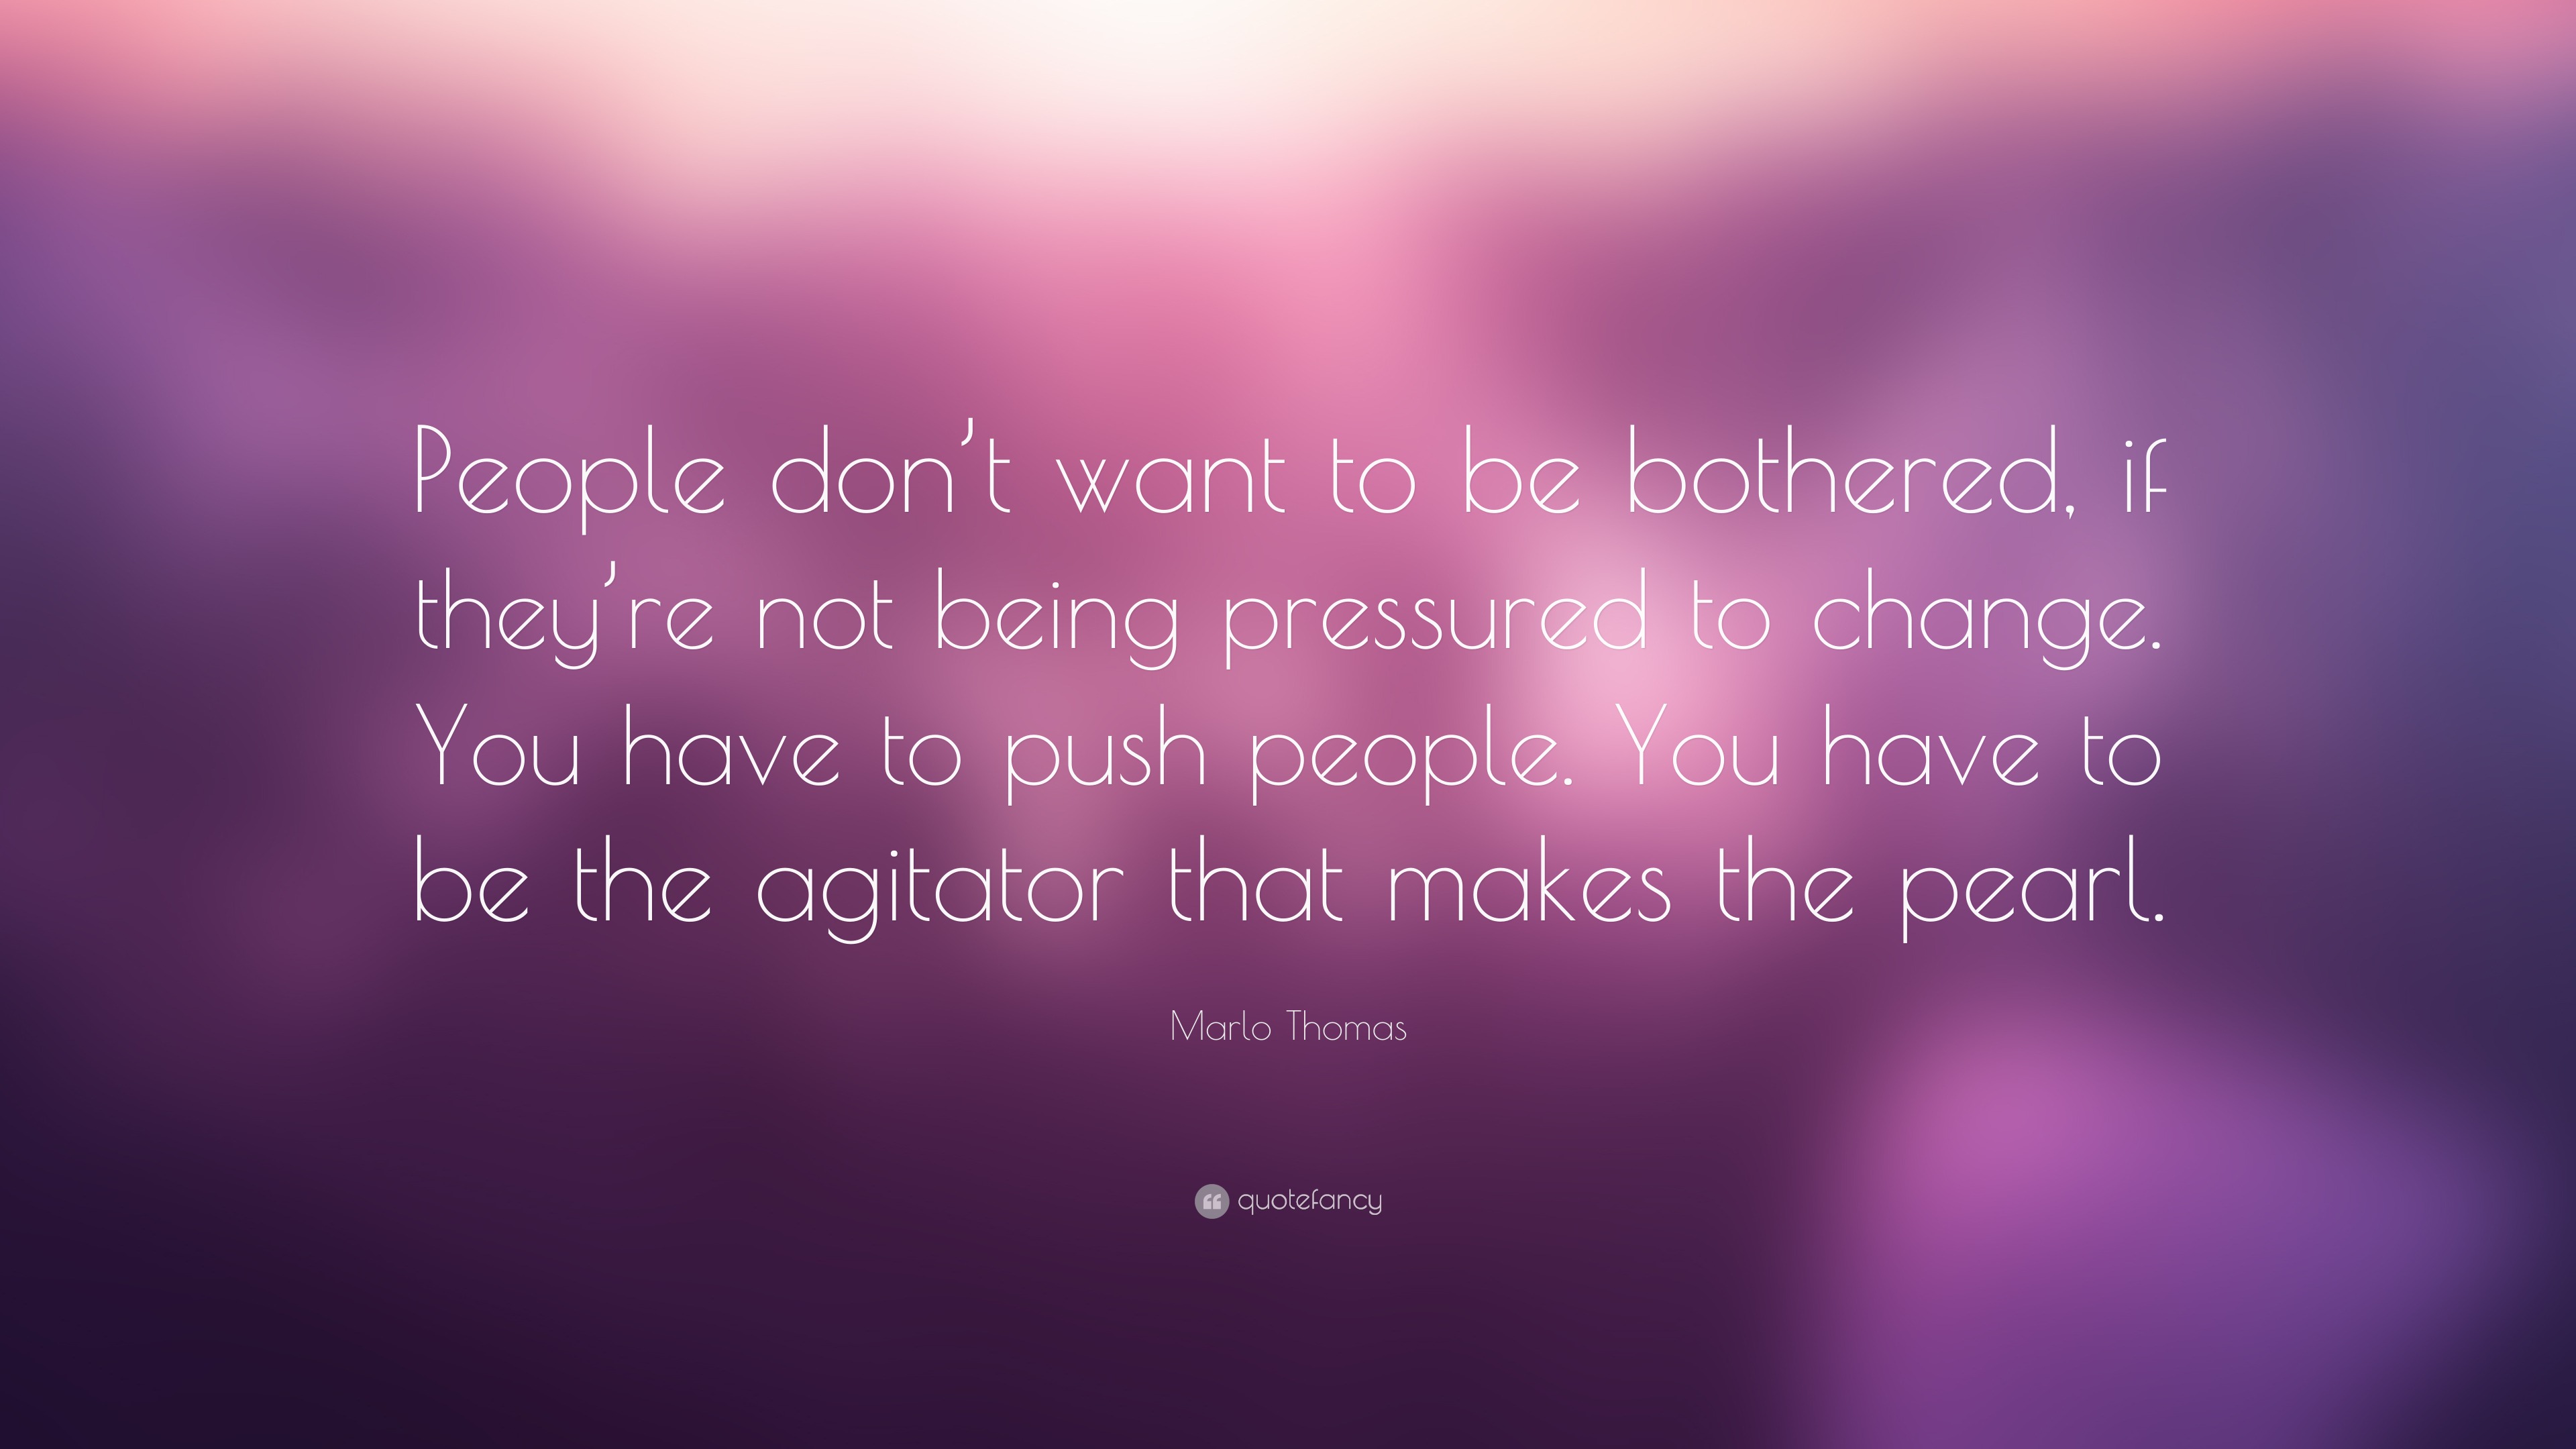 Marlo Thomas Quote: “People don’t want to be bothered, if they’re not ...